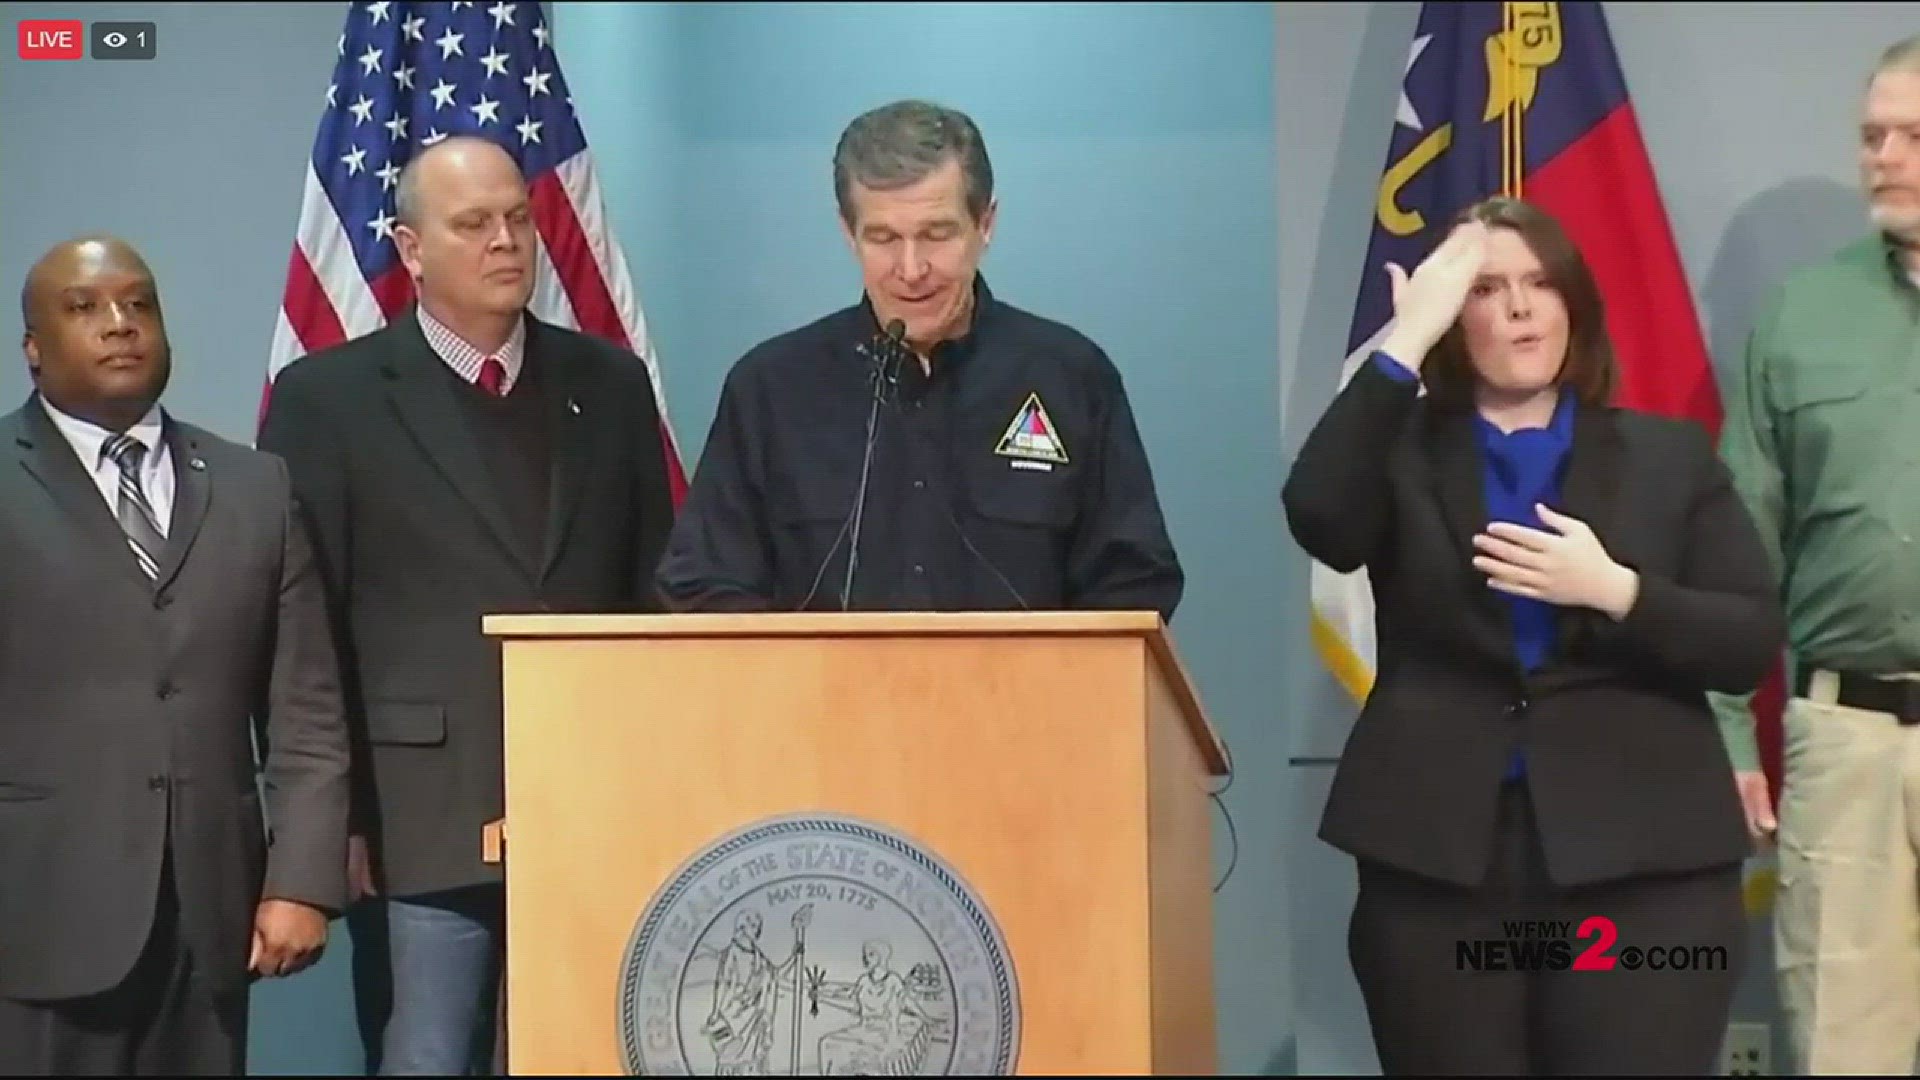 Governor Cooper Winter Weather Press Conference